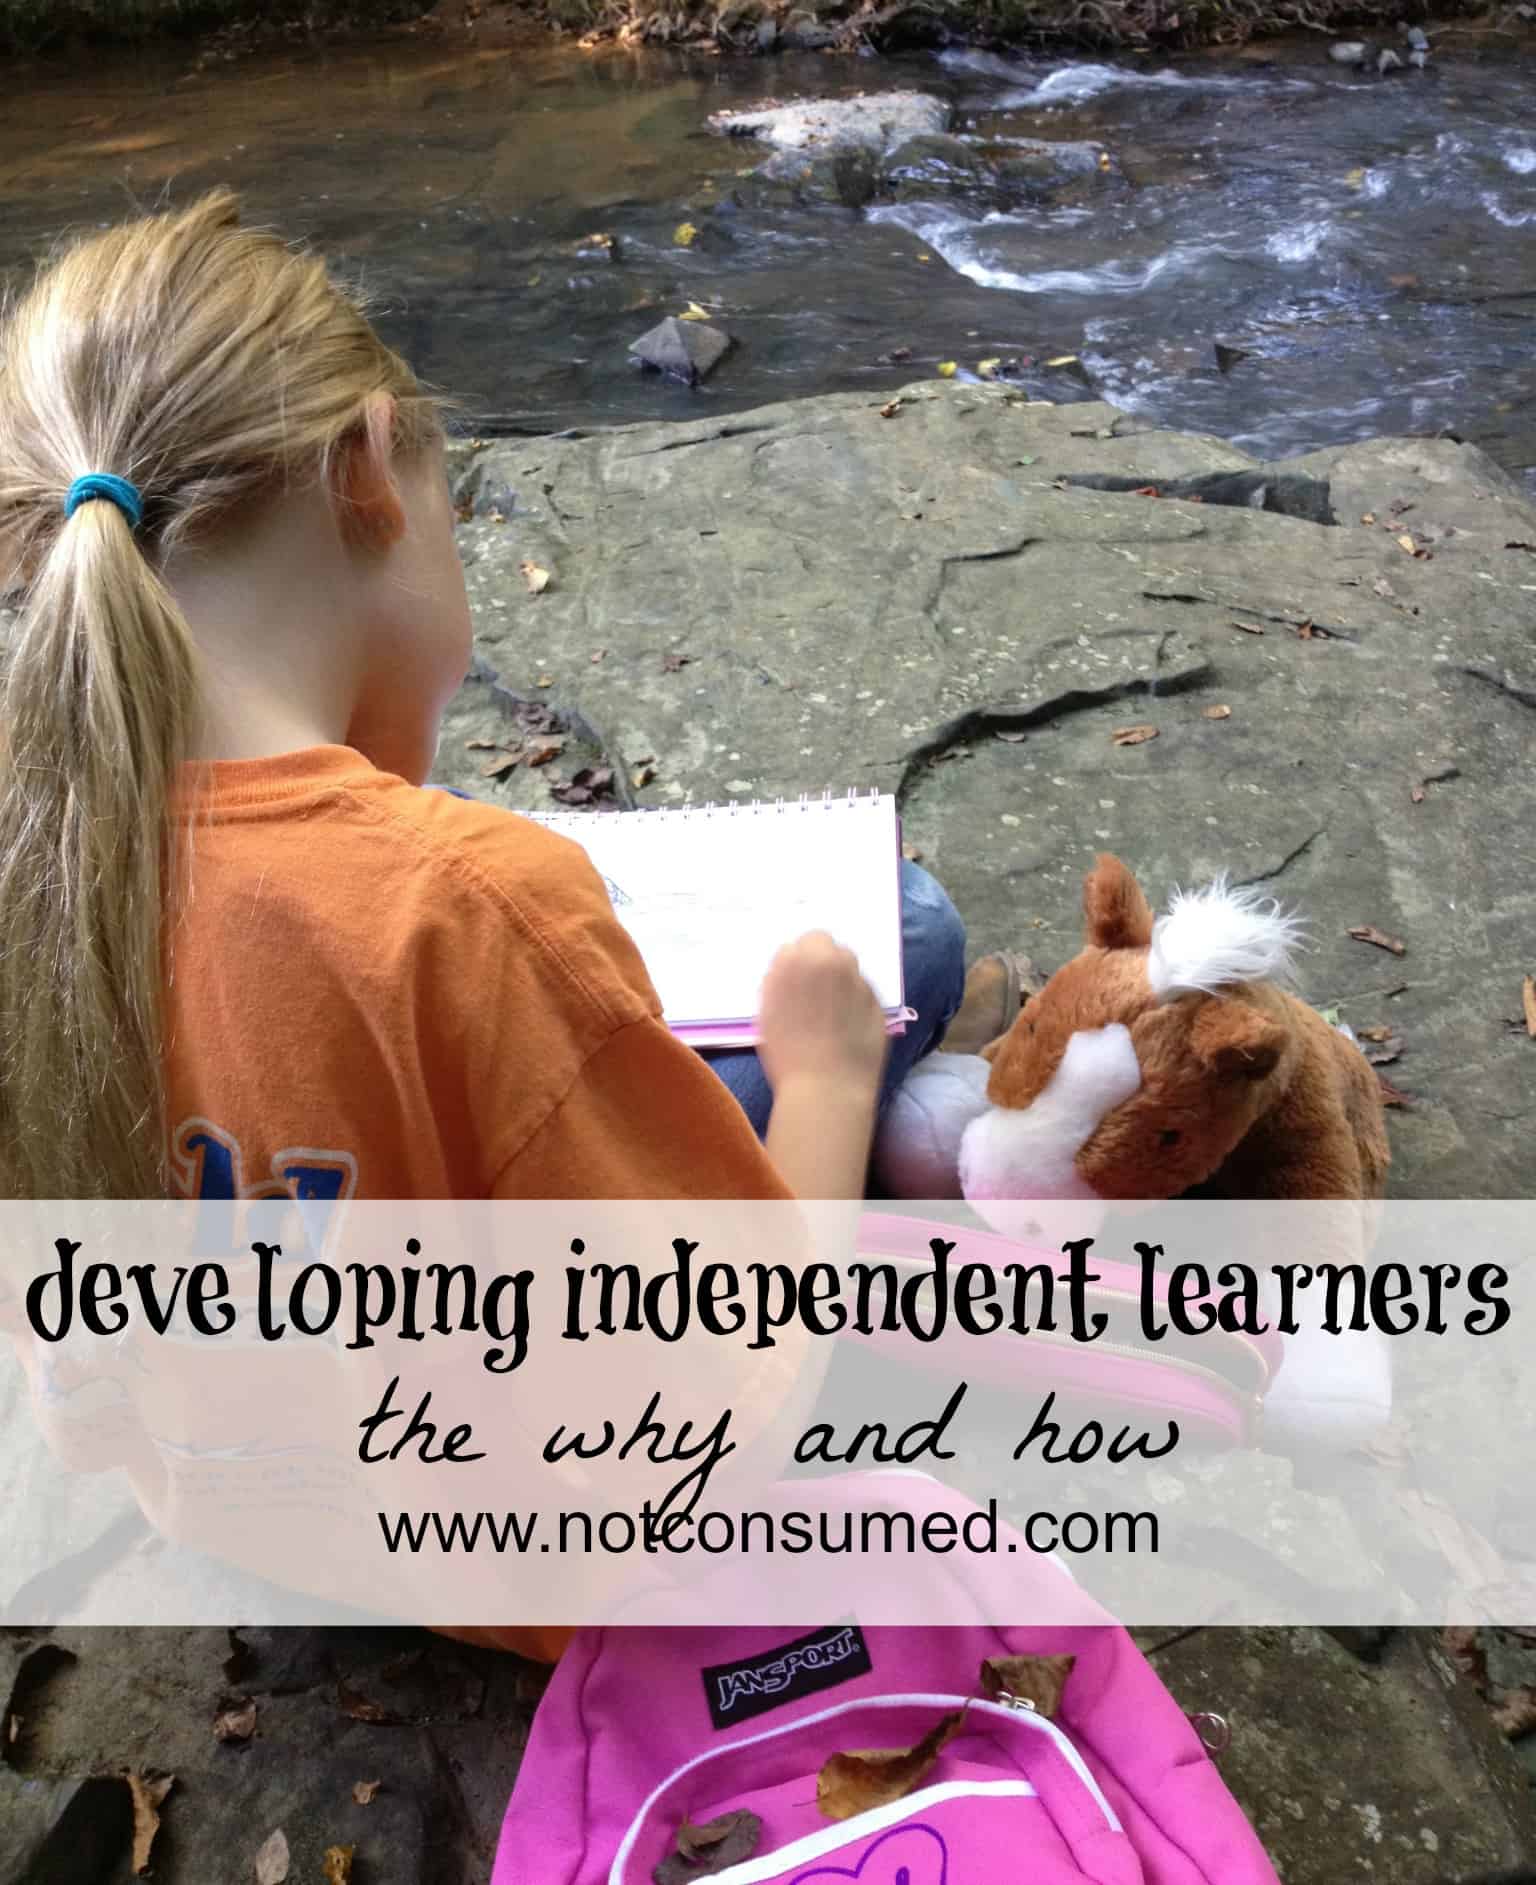 Developing independent learners